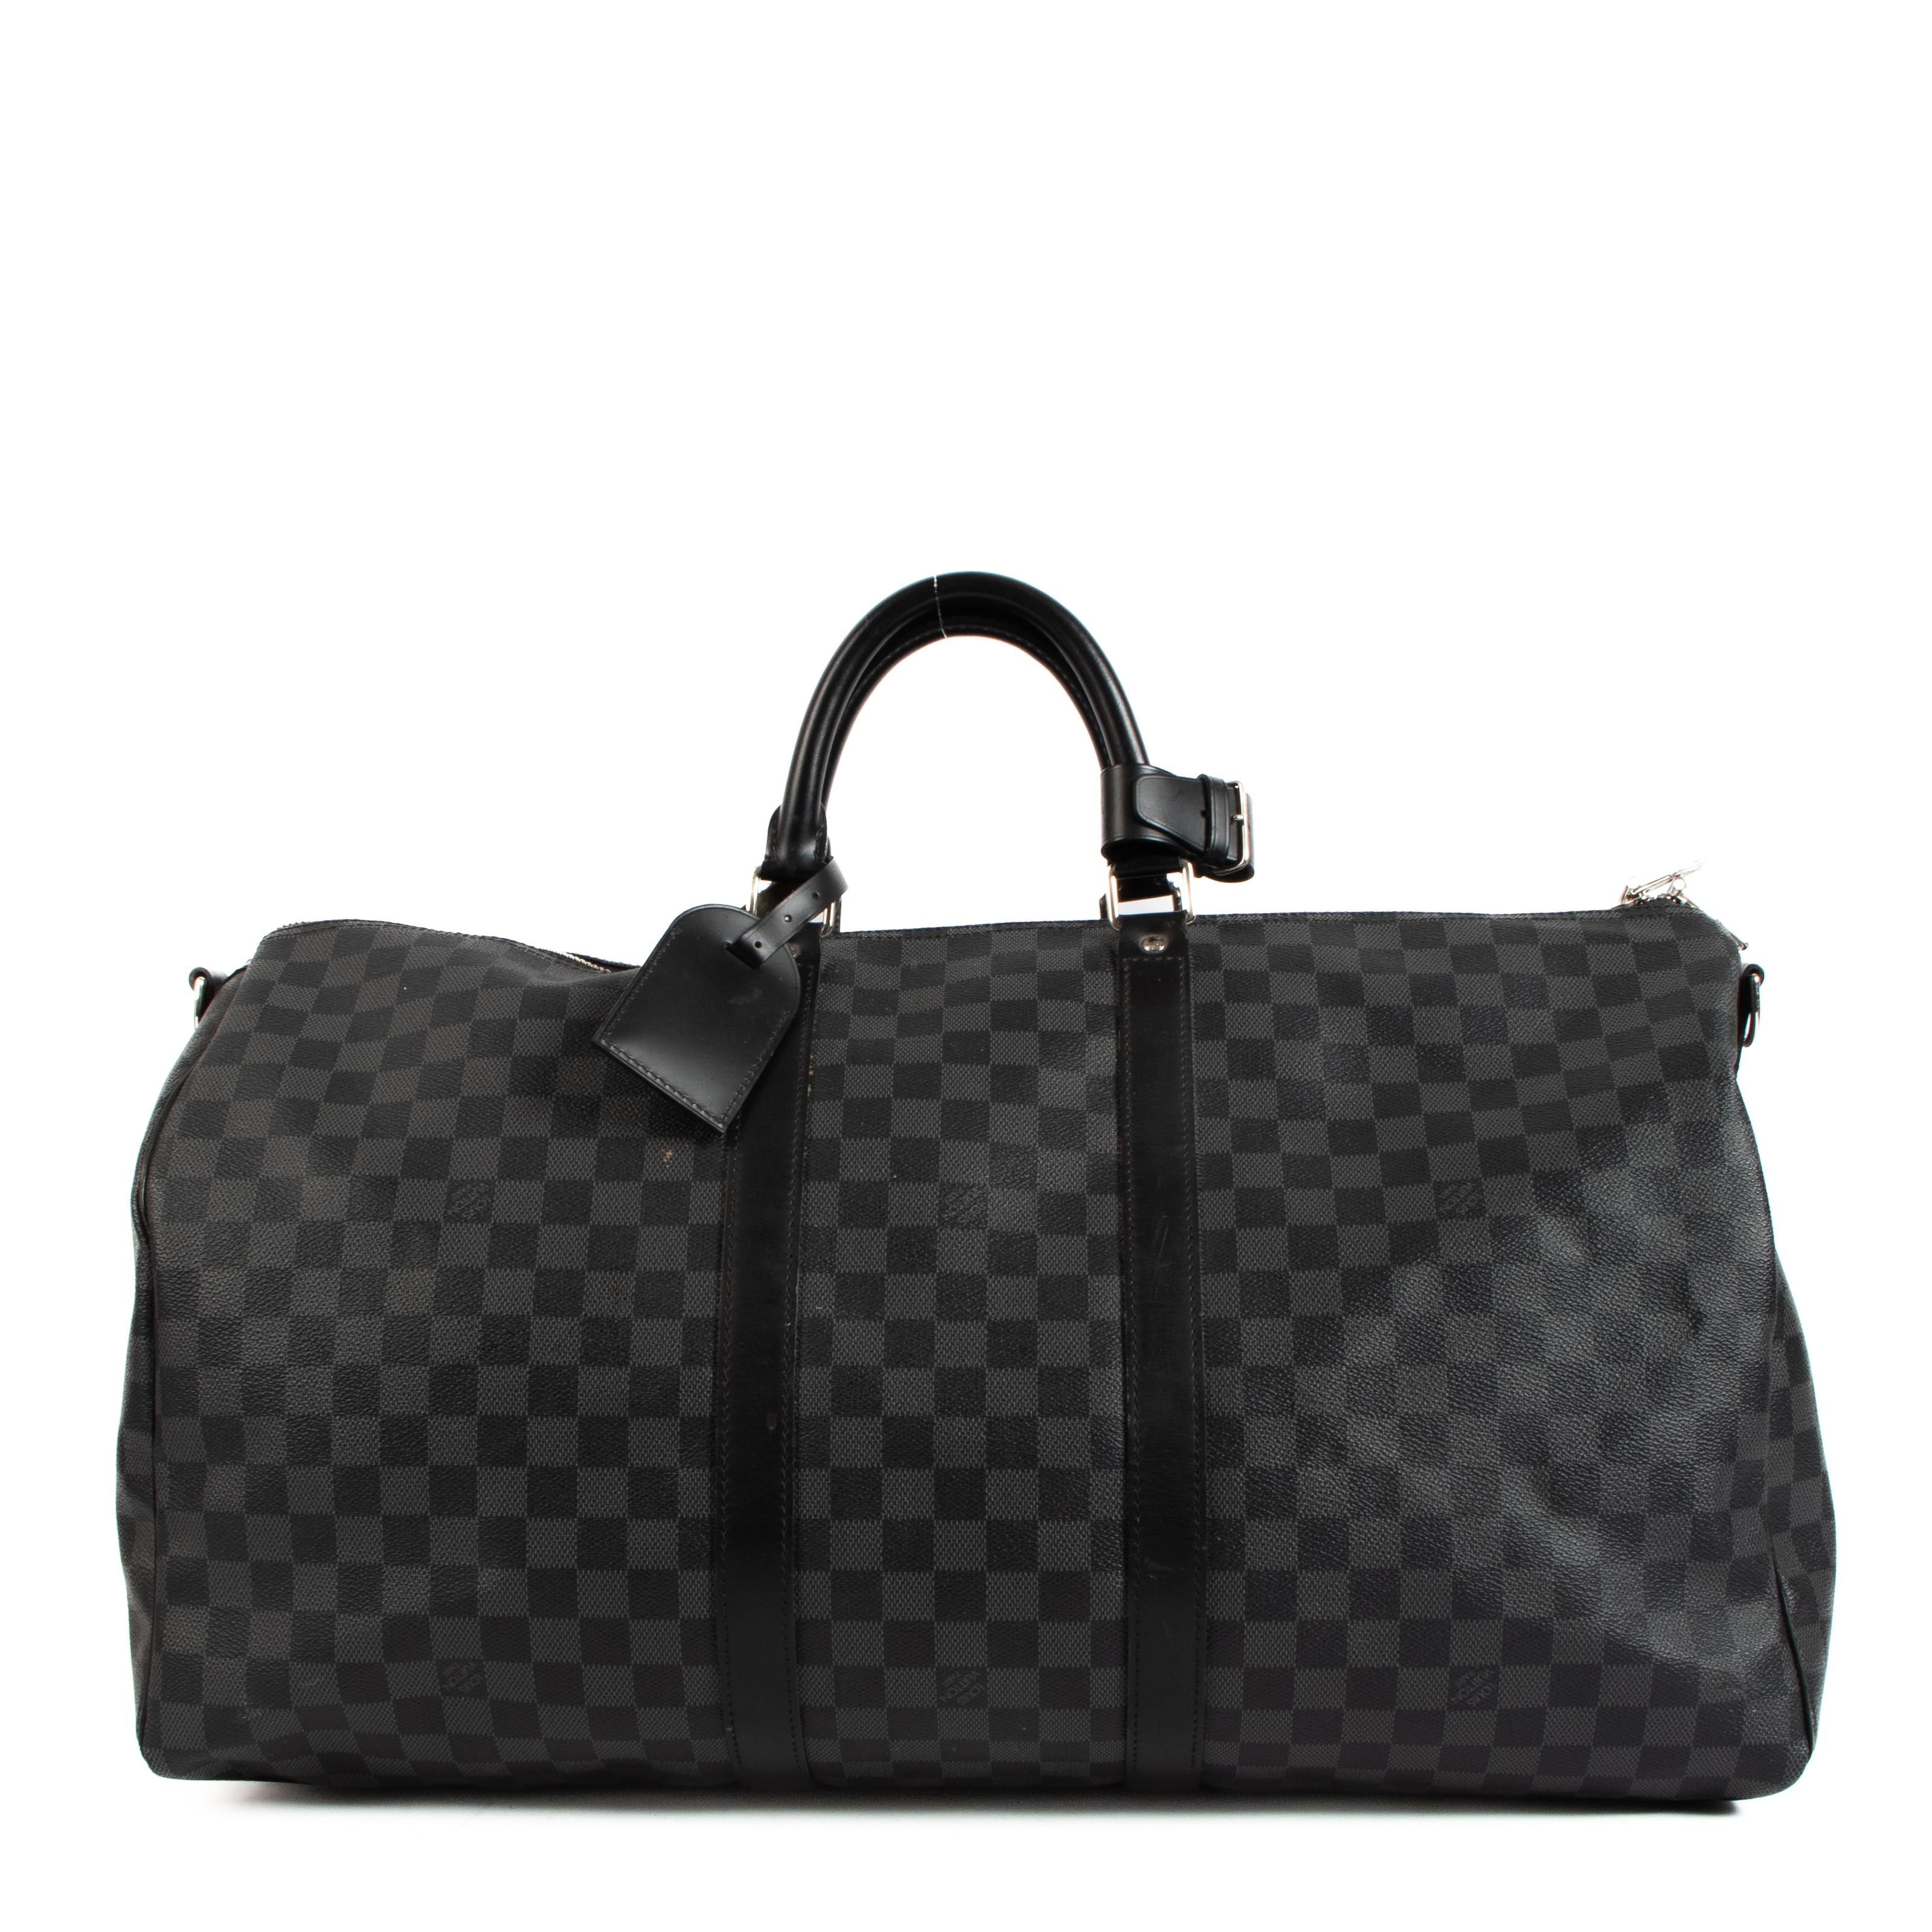 This contemporary Louis Vuitton Keepall 55 travel bag in a revisited classic, in demure Damier Graphite canvas, is not only stylish but also water resistant and light. Hand held with a removable shoulder strap makes it practical to use for every